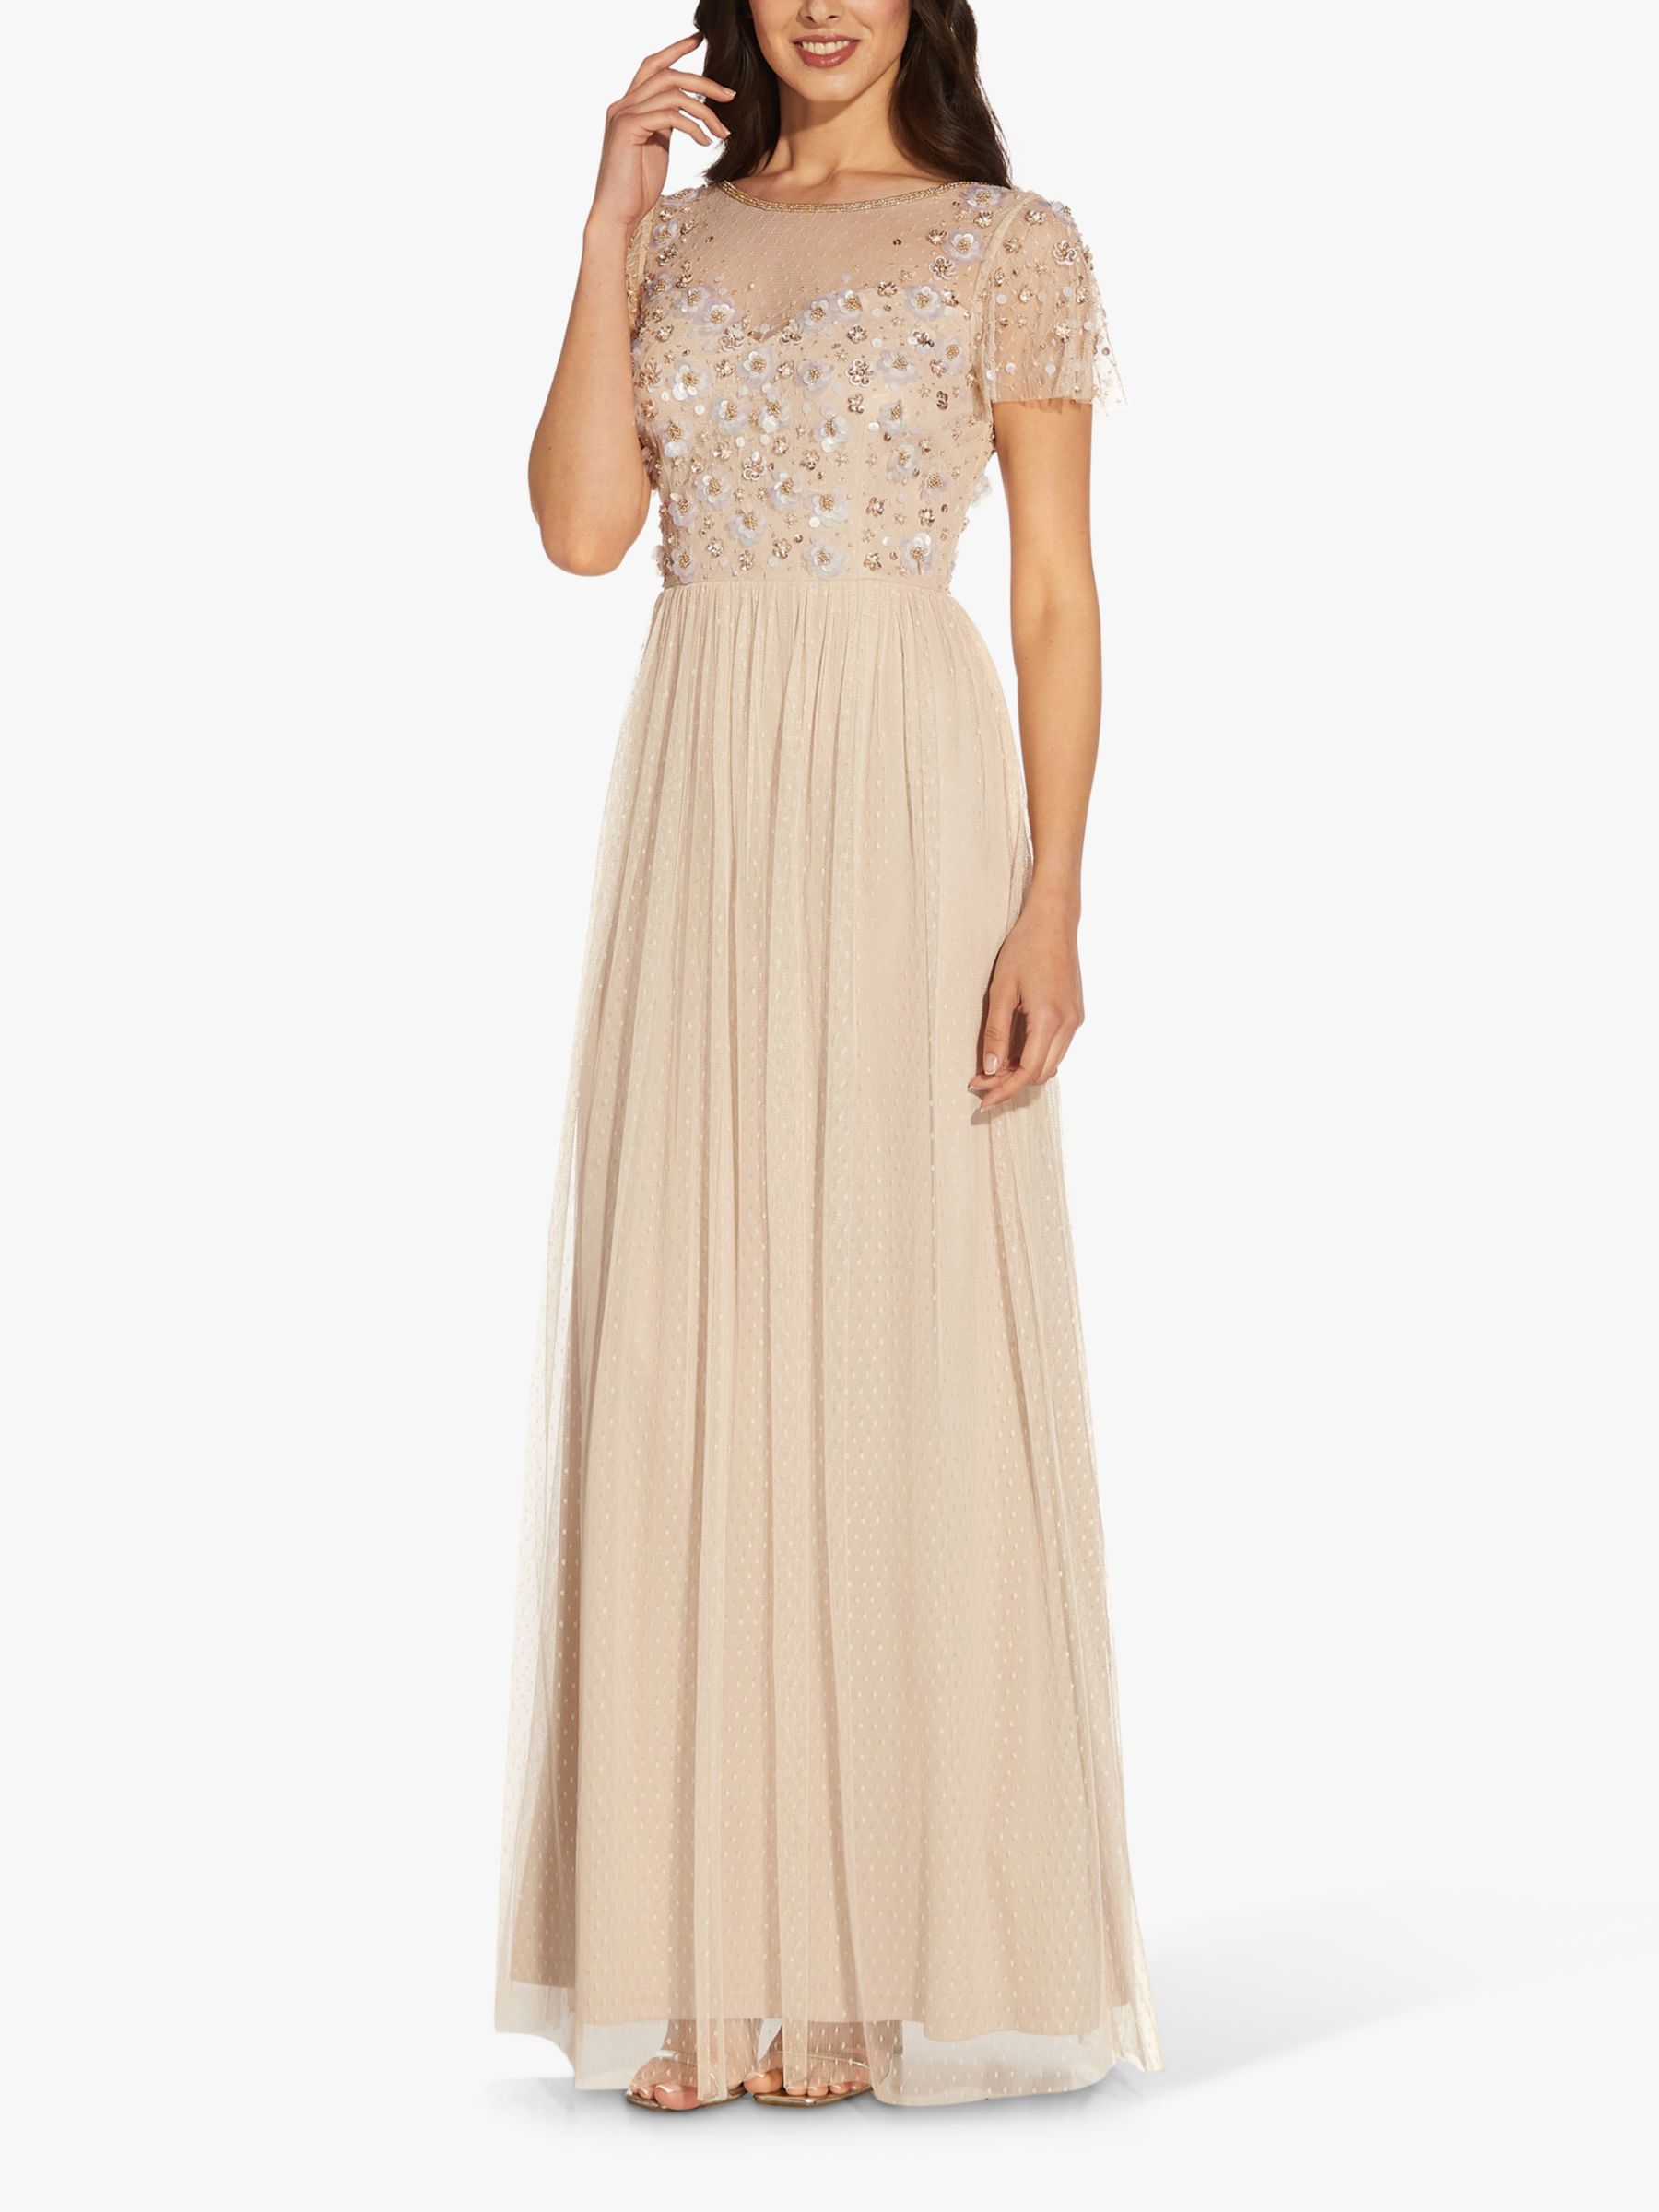 Adrianna Papell 3D Beaded Point Maxi Dress, Biscotti at John Lewis ...